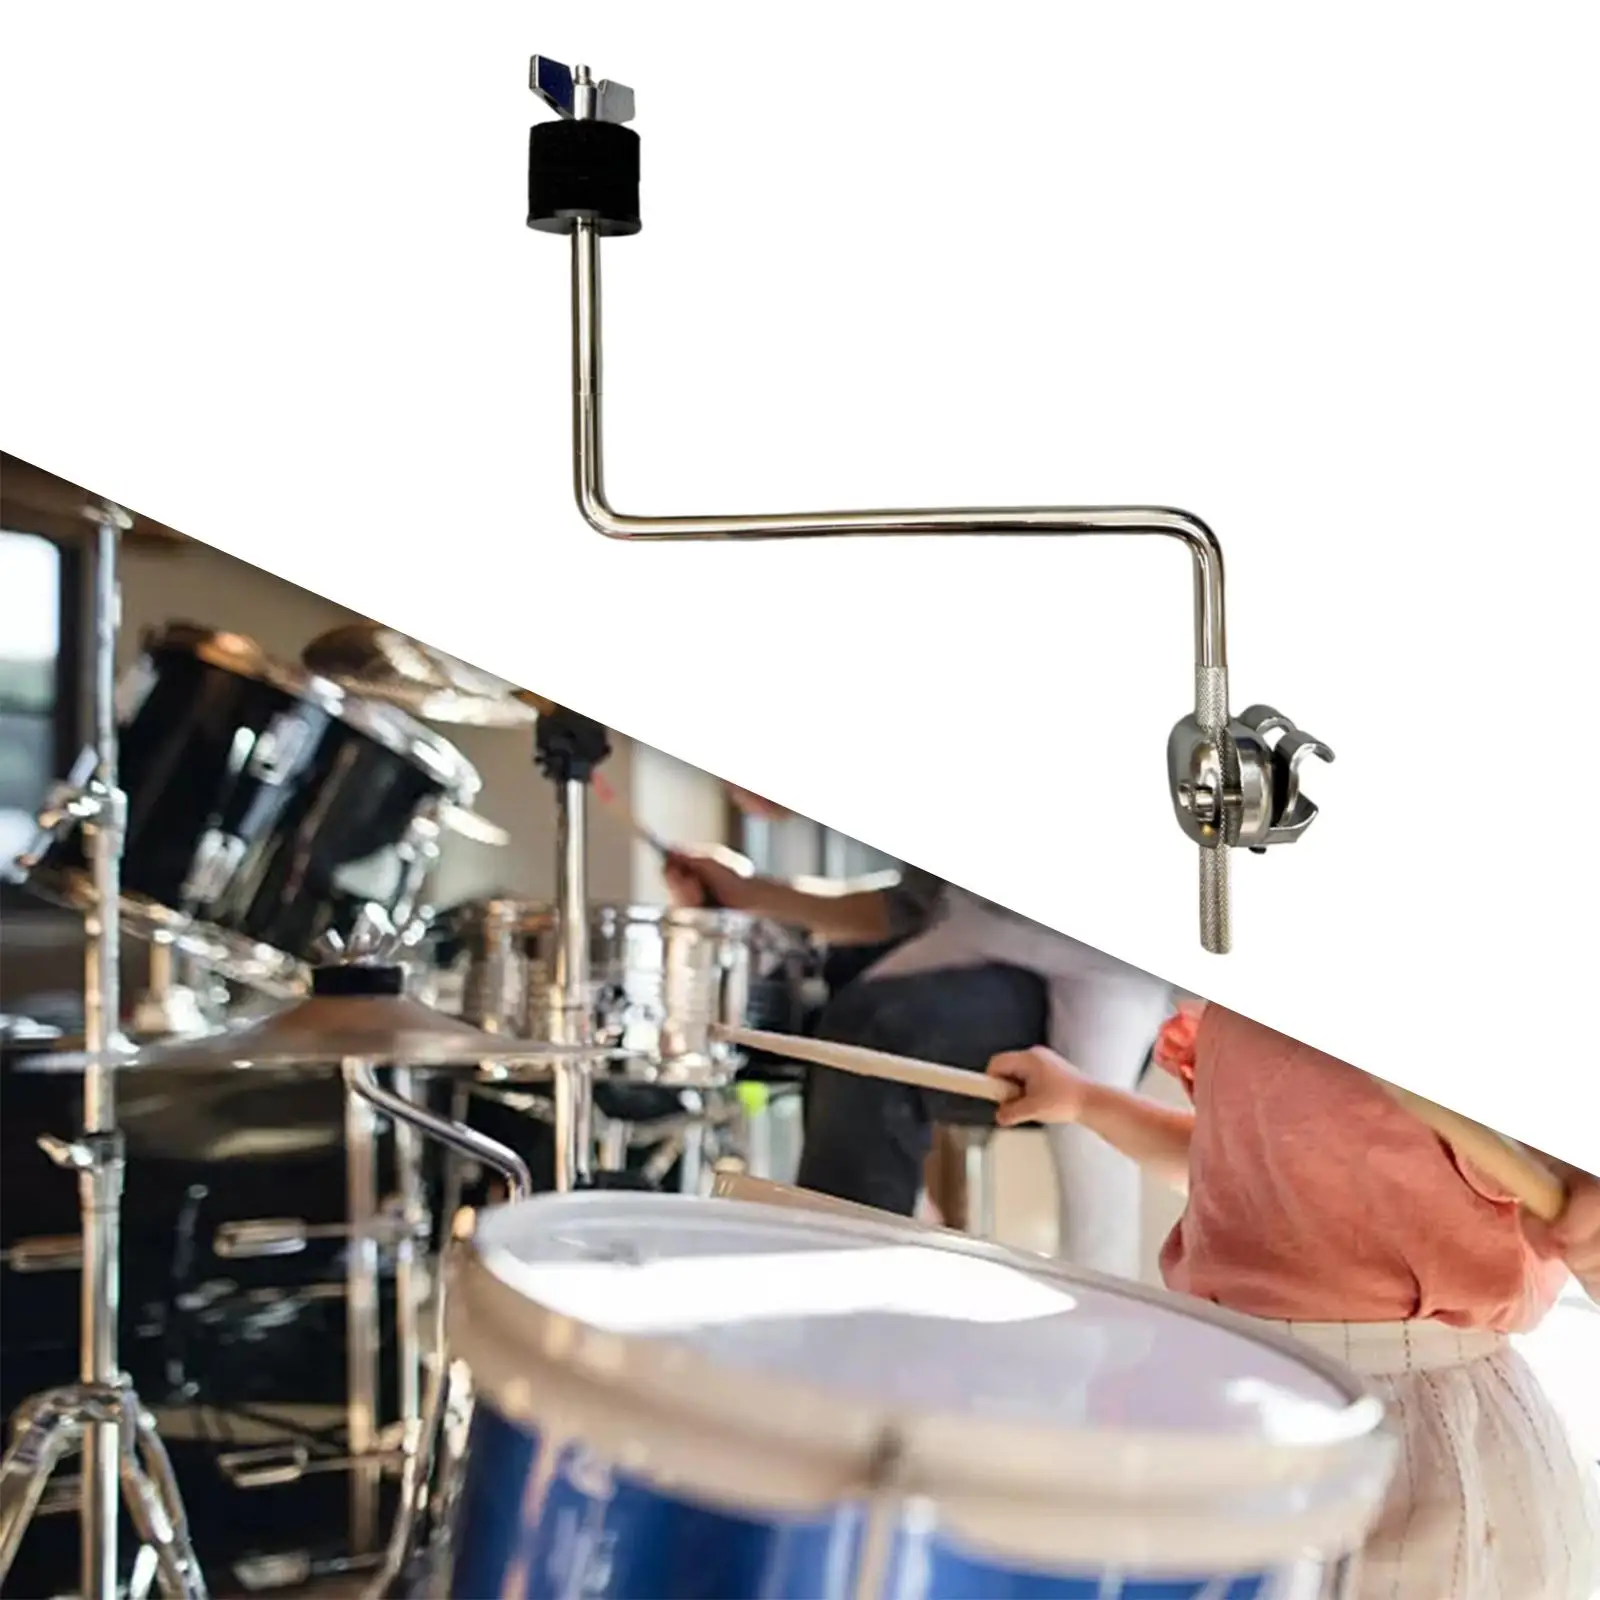 

Cymbal Mount Accessories Sturdy Strong Easy to Install Replacements Cymbal Arm Clamp Percussion Mounting Arms Cymbal Expand Arm